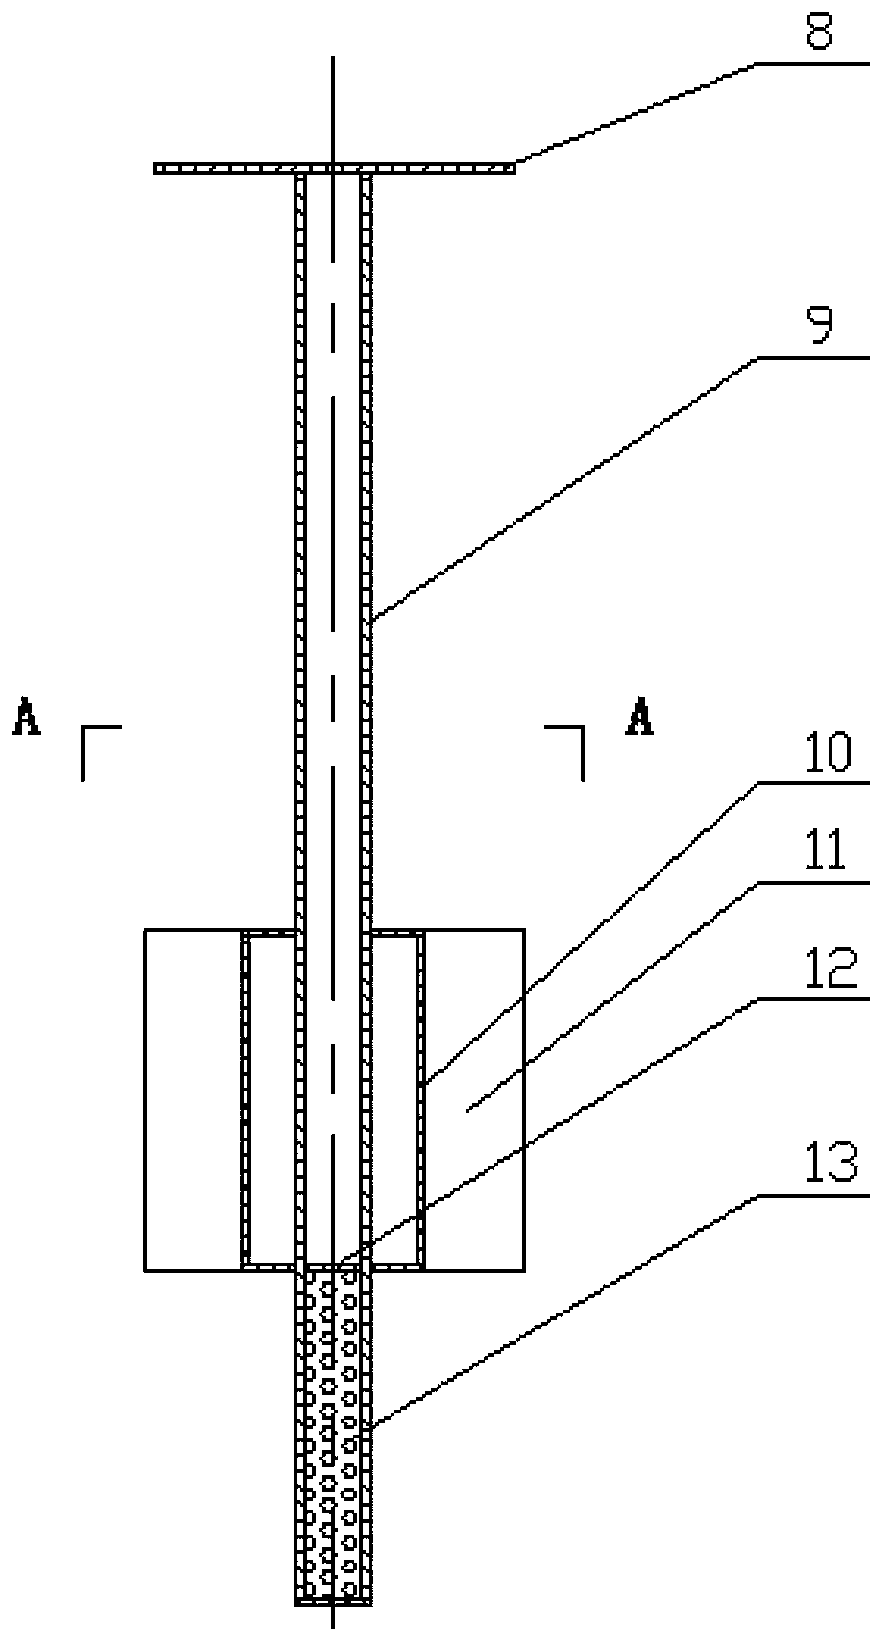 Device and method for measuring wireless receiving and sending ultrasonic brine baume degree, evaporation capacity and liquid level